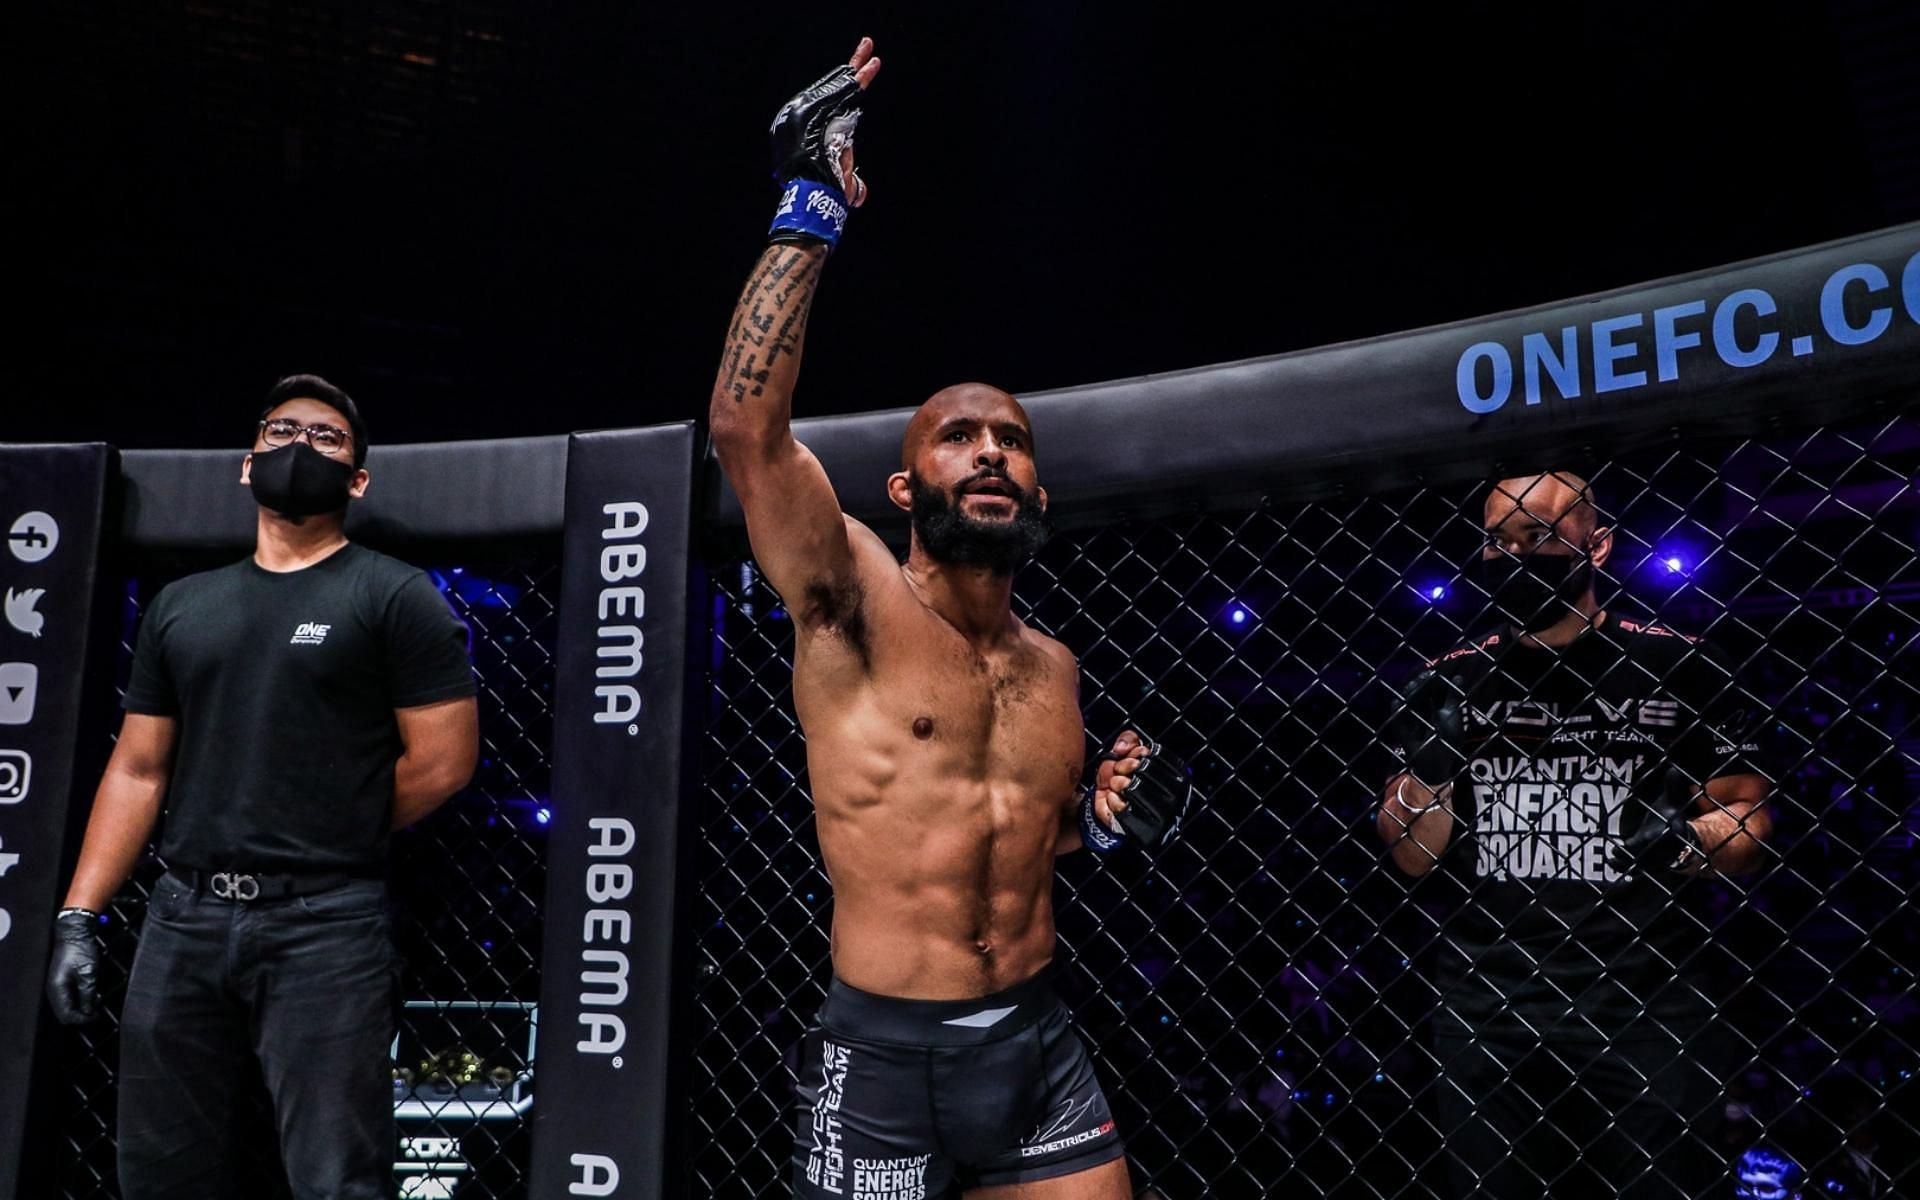 Demetrious Johnson thinks ONE Championship will thrive in front of a US audience. (Image courtesy of ONE Championship)